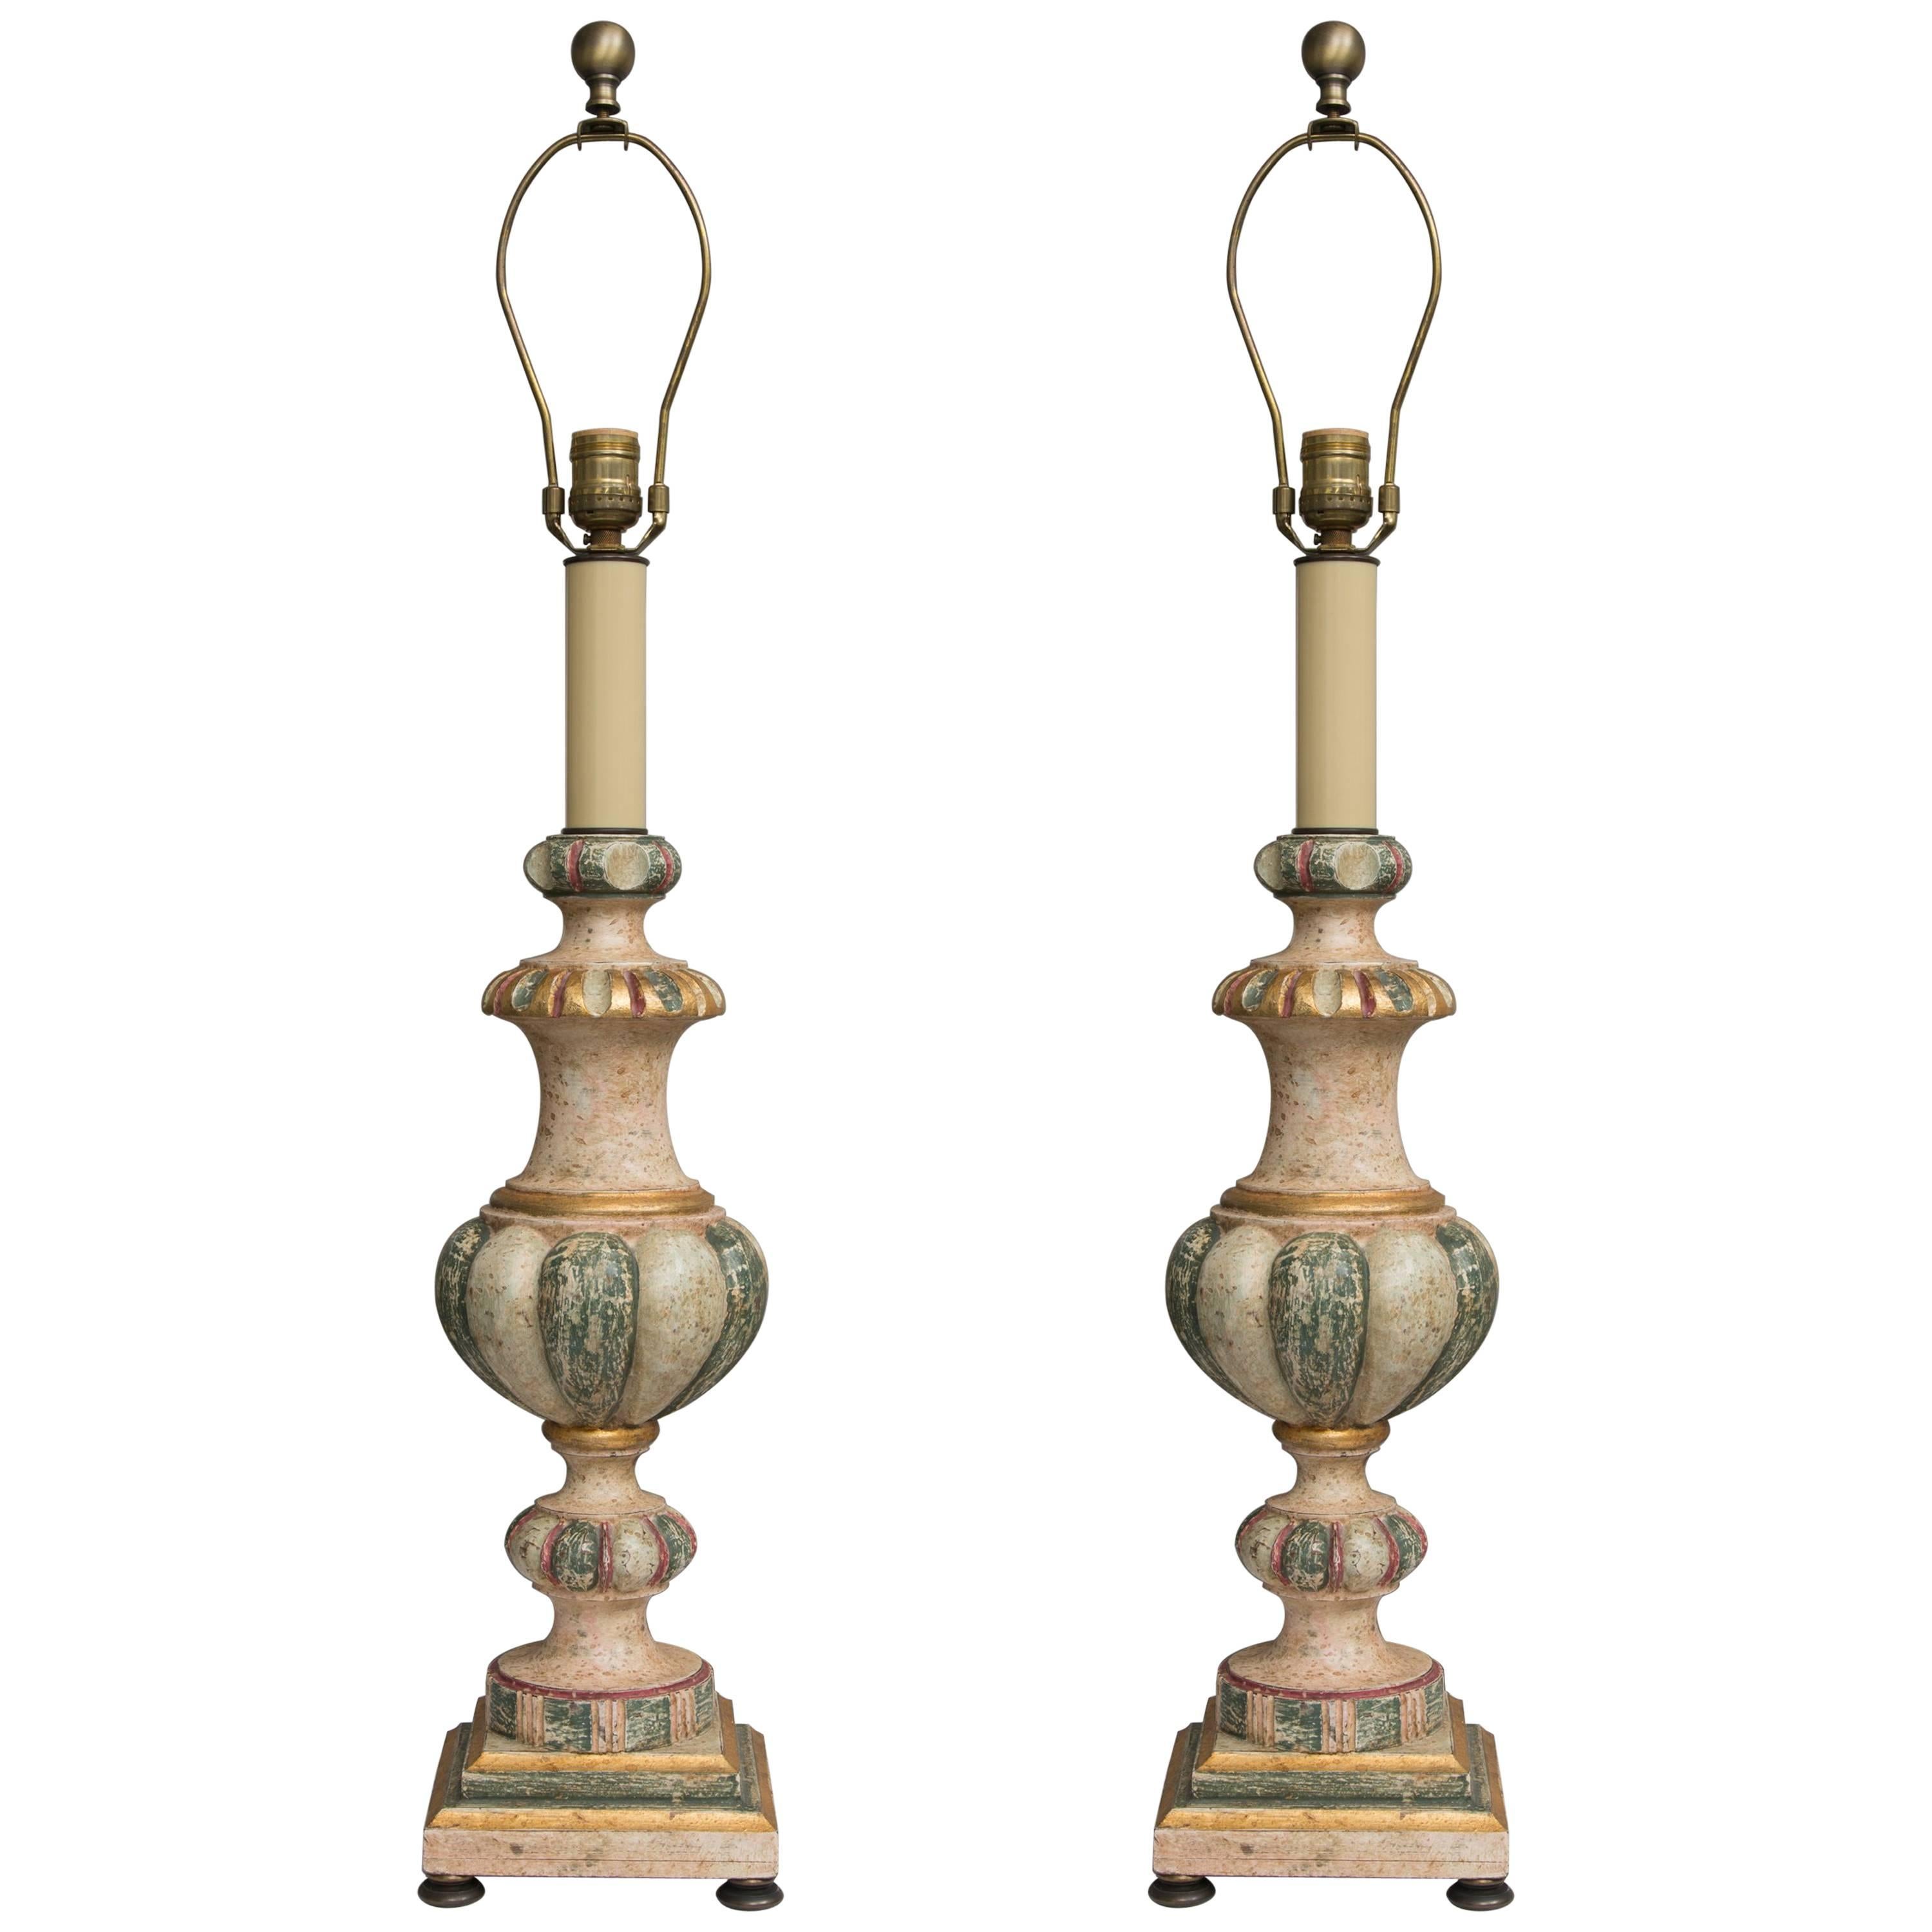 Pair of Polychromed Italian Architectural Elements as Lamps